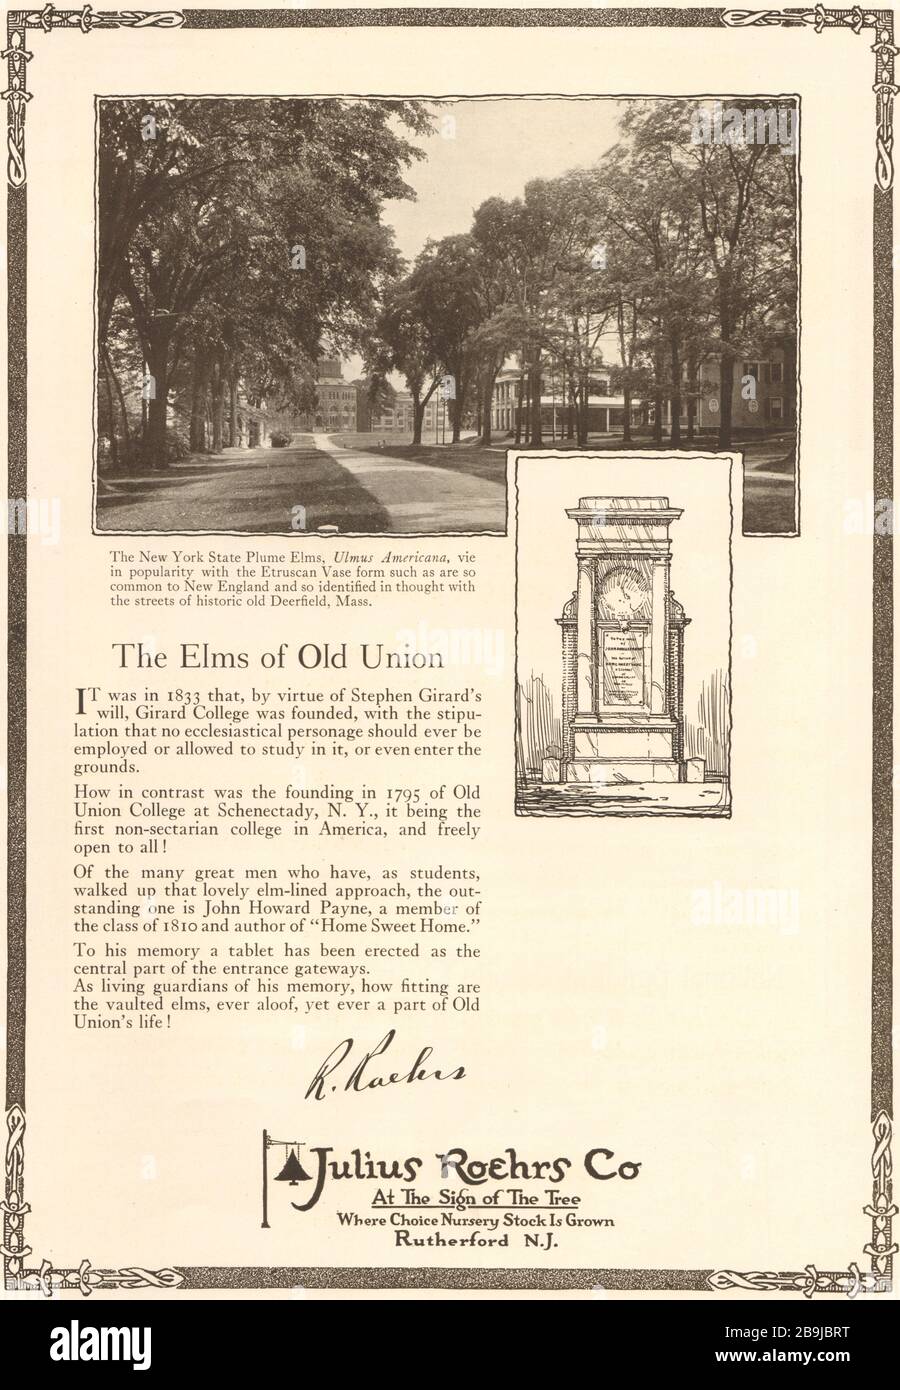 The Elms of Old Union. The New York state Plume Elms, Ulmus Americana. Julius Roehrs Co., Rutherford, New York (1922) Stock Photo